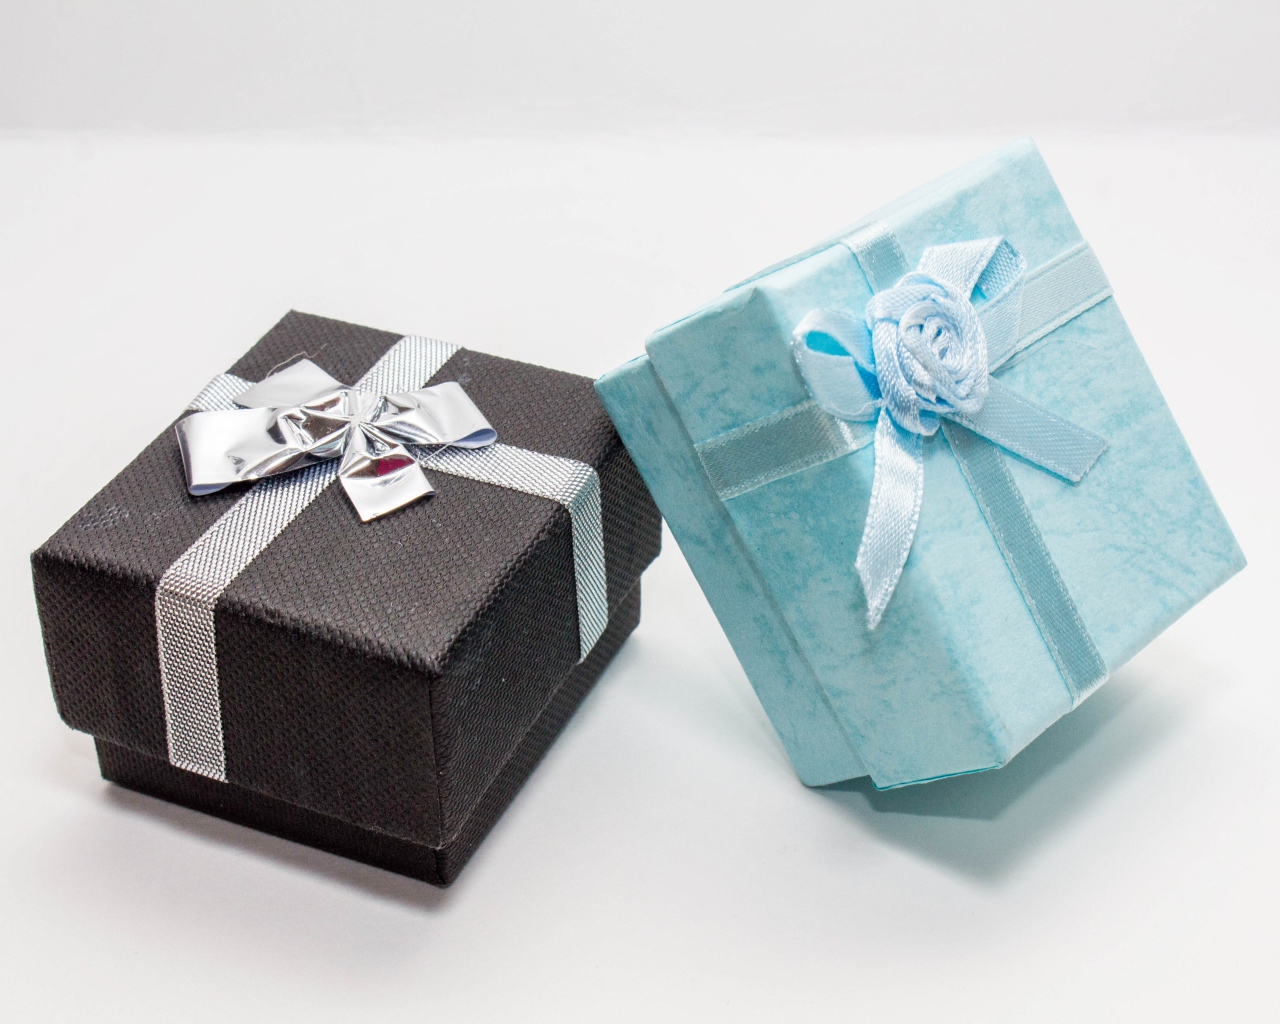 Two boxes with gifts on a gray background